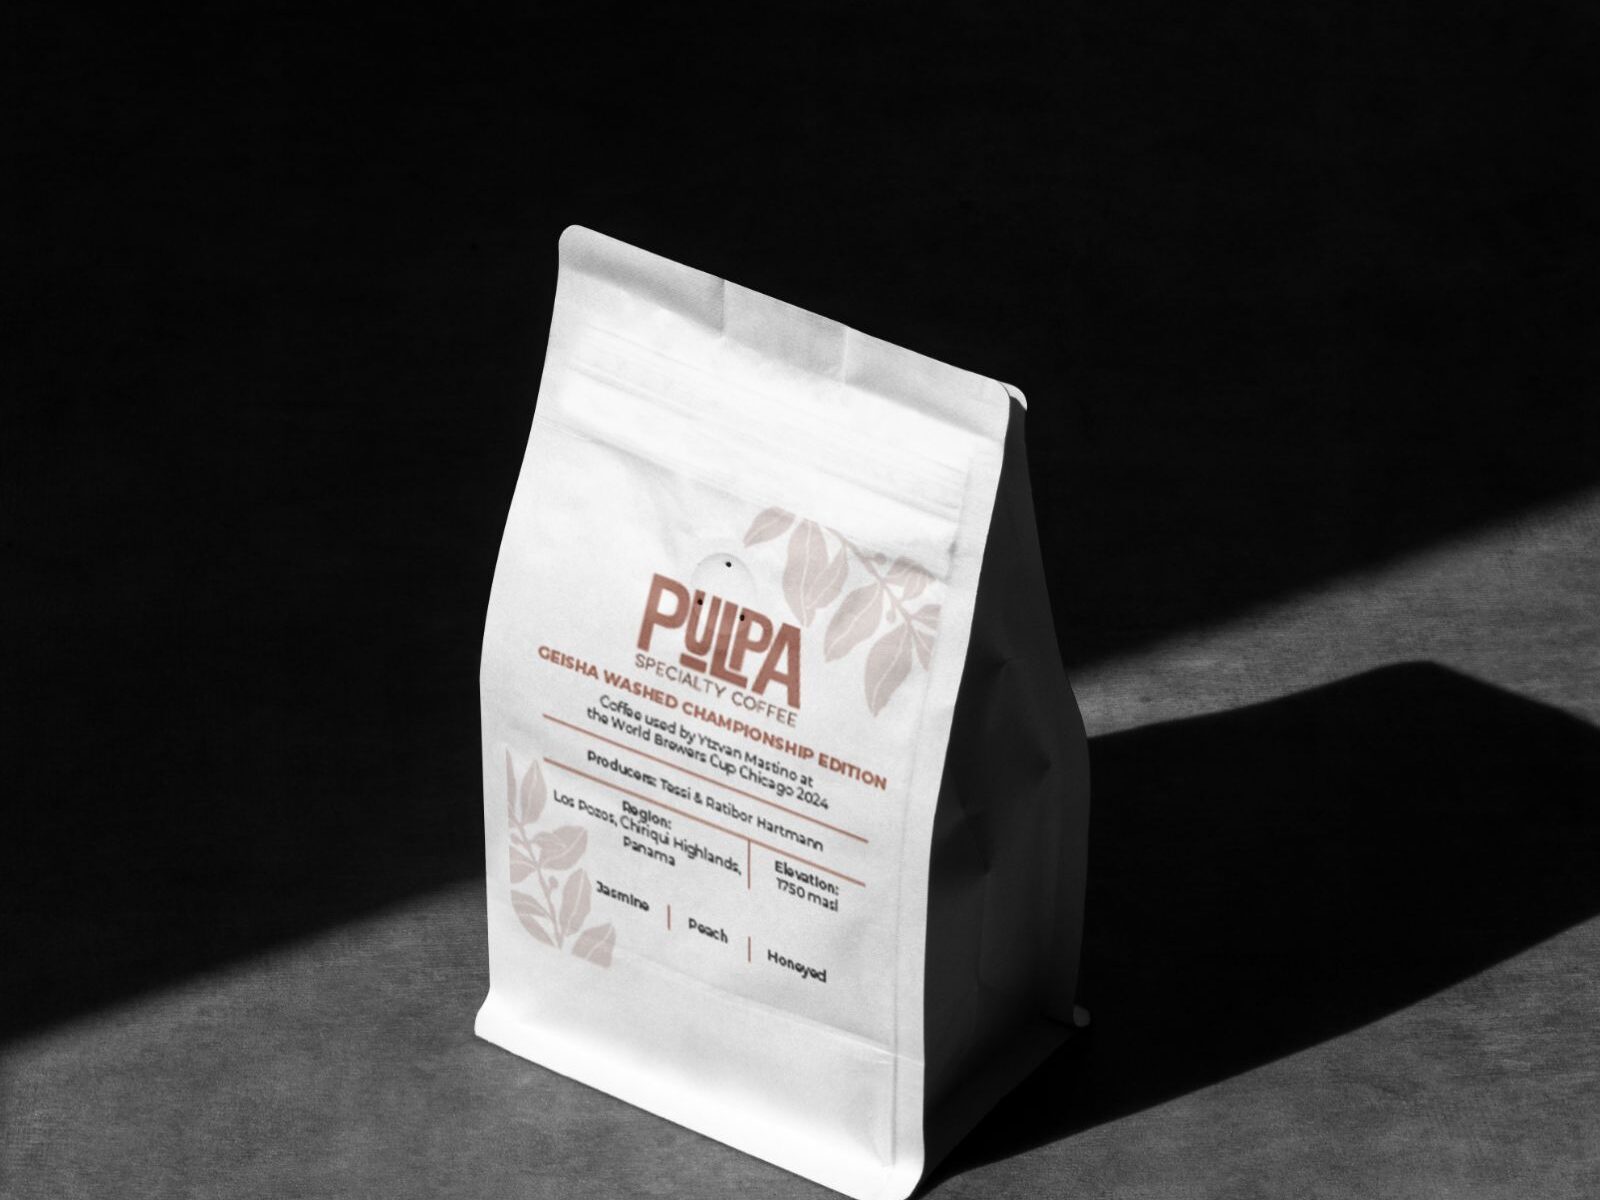 Pulpa Traditional Specialty Coffee from Panama